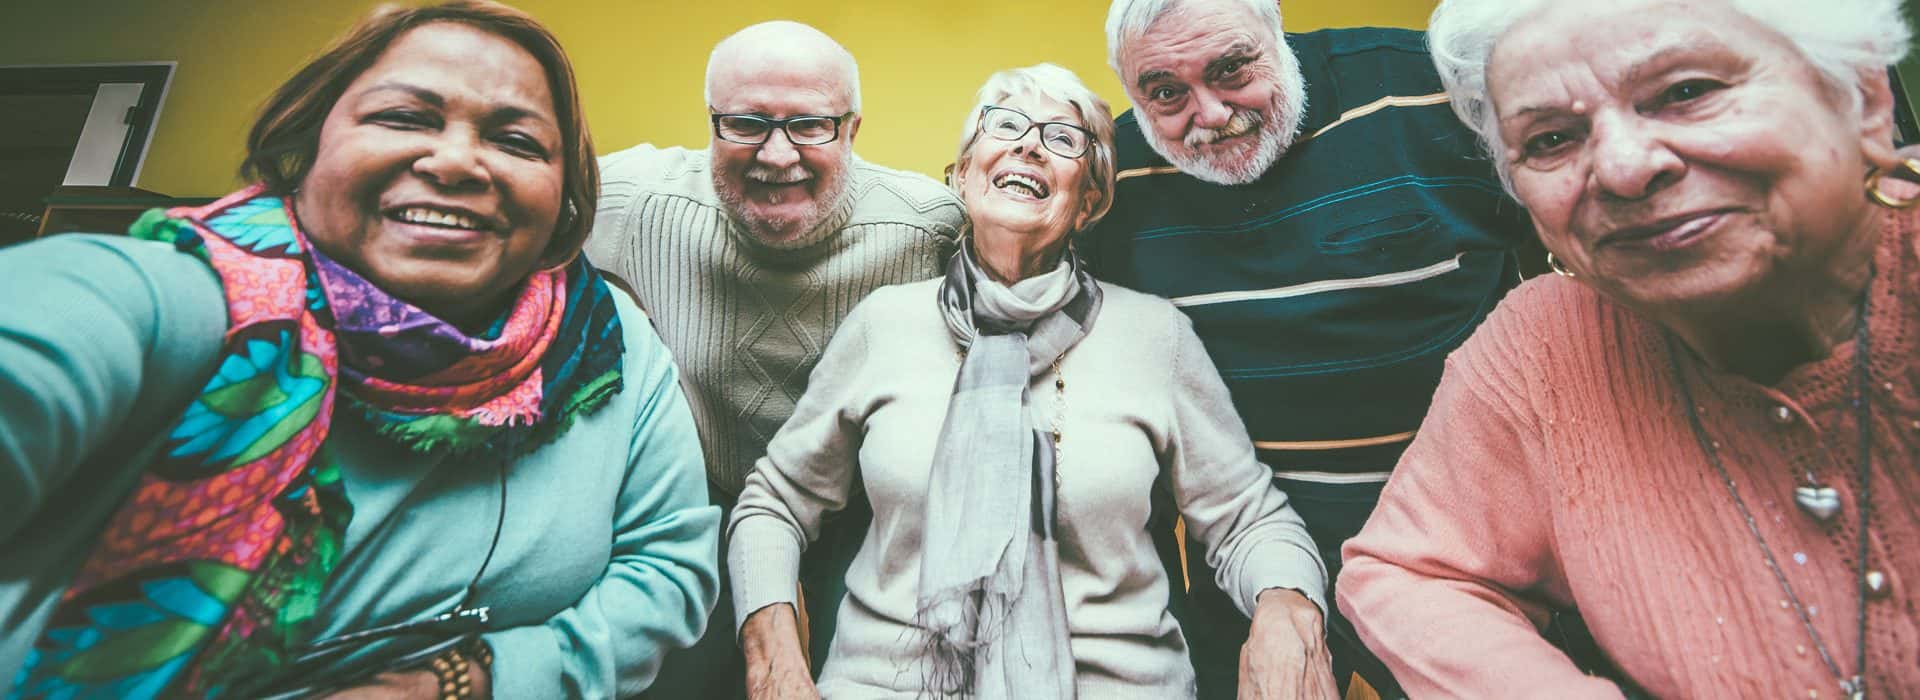 A group of multi-ethnic seniors pose for the camera at a senior center.